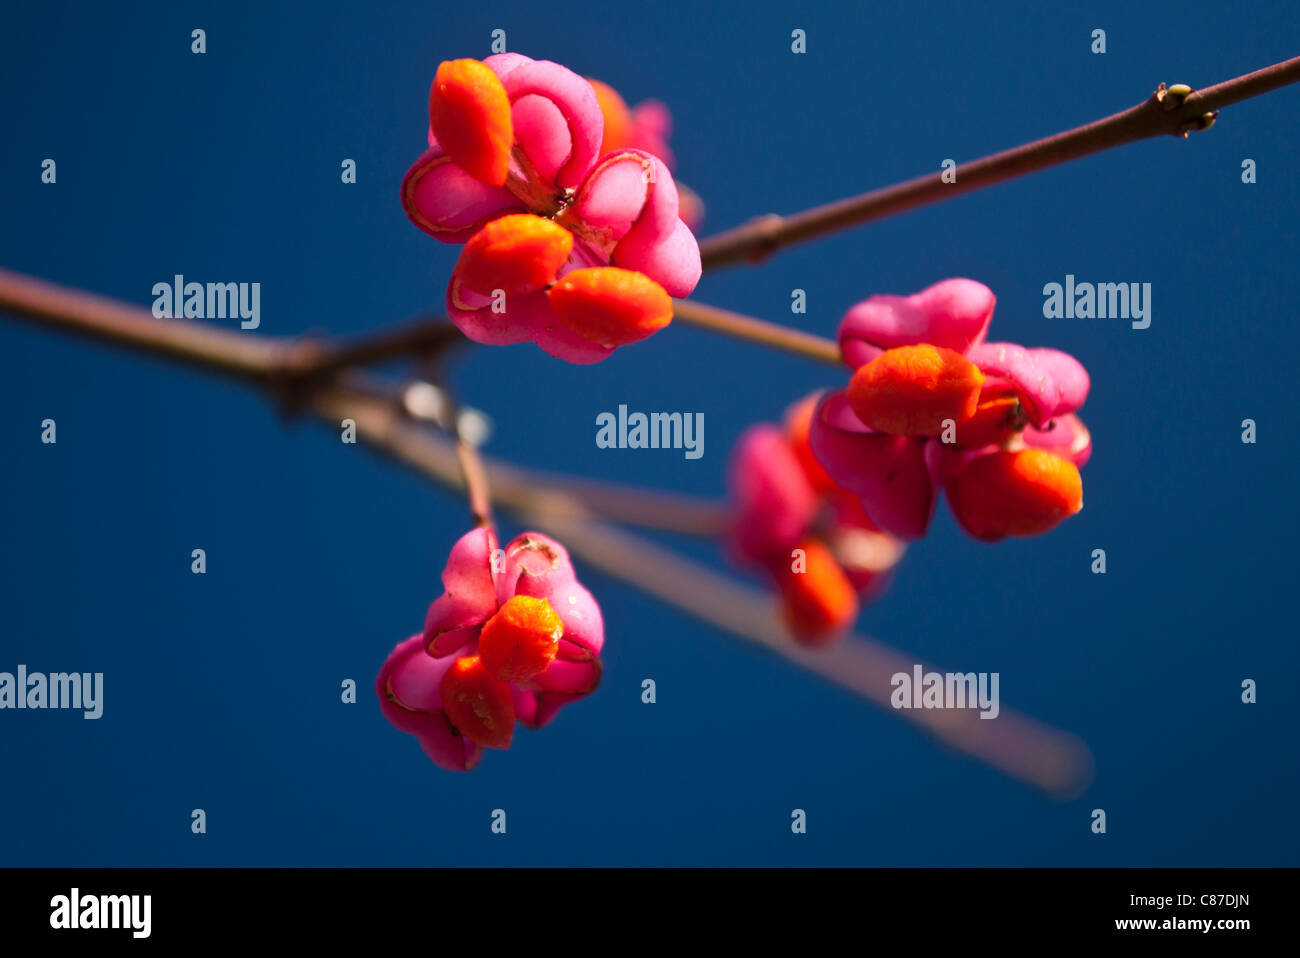 Pink fruit of the Spindle tree, or Euonymus, against a blue sky Stock Photo